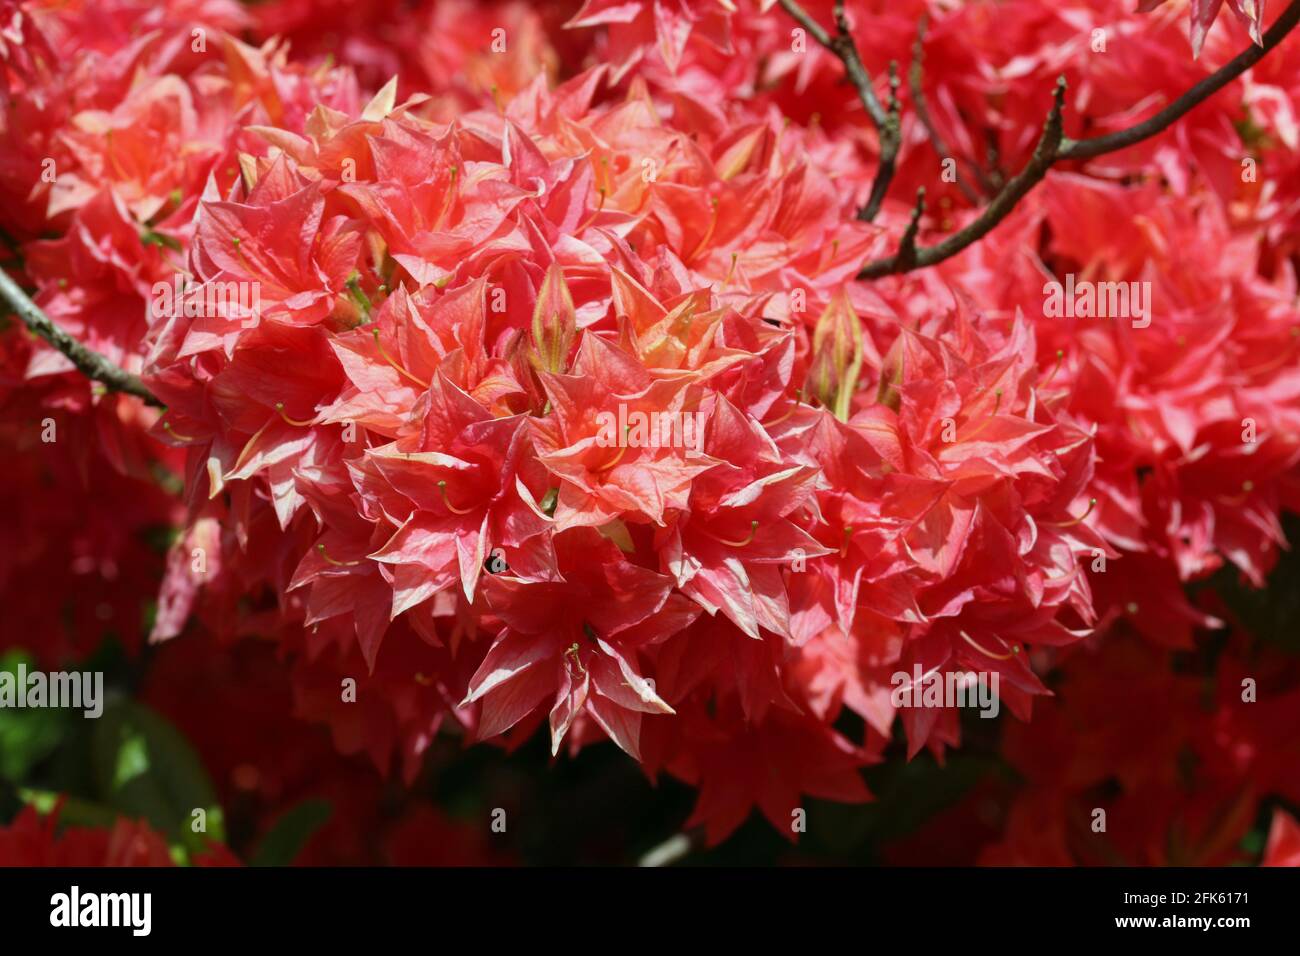 Red tinged with orange Rhododendron flower head with a dark blurred background of leaves and flowers. Stock Photo